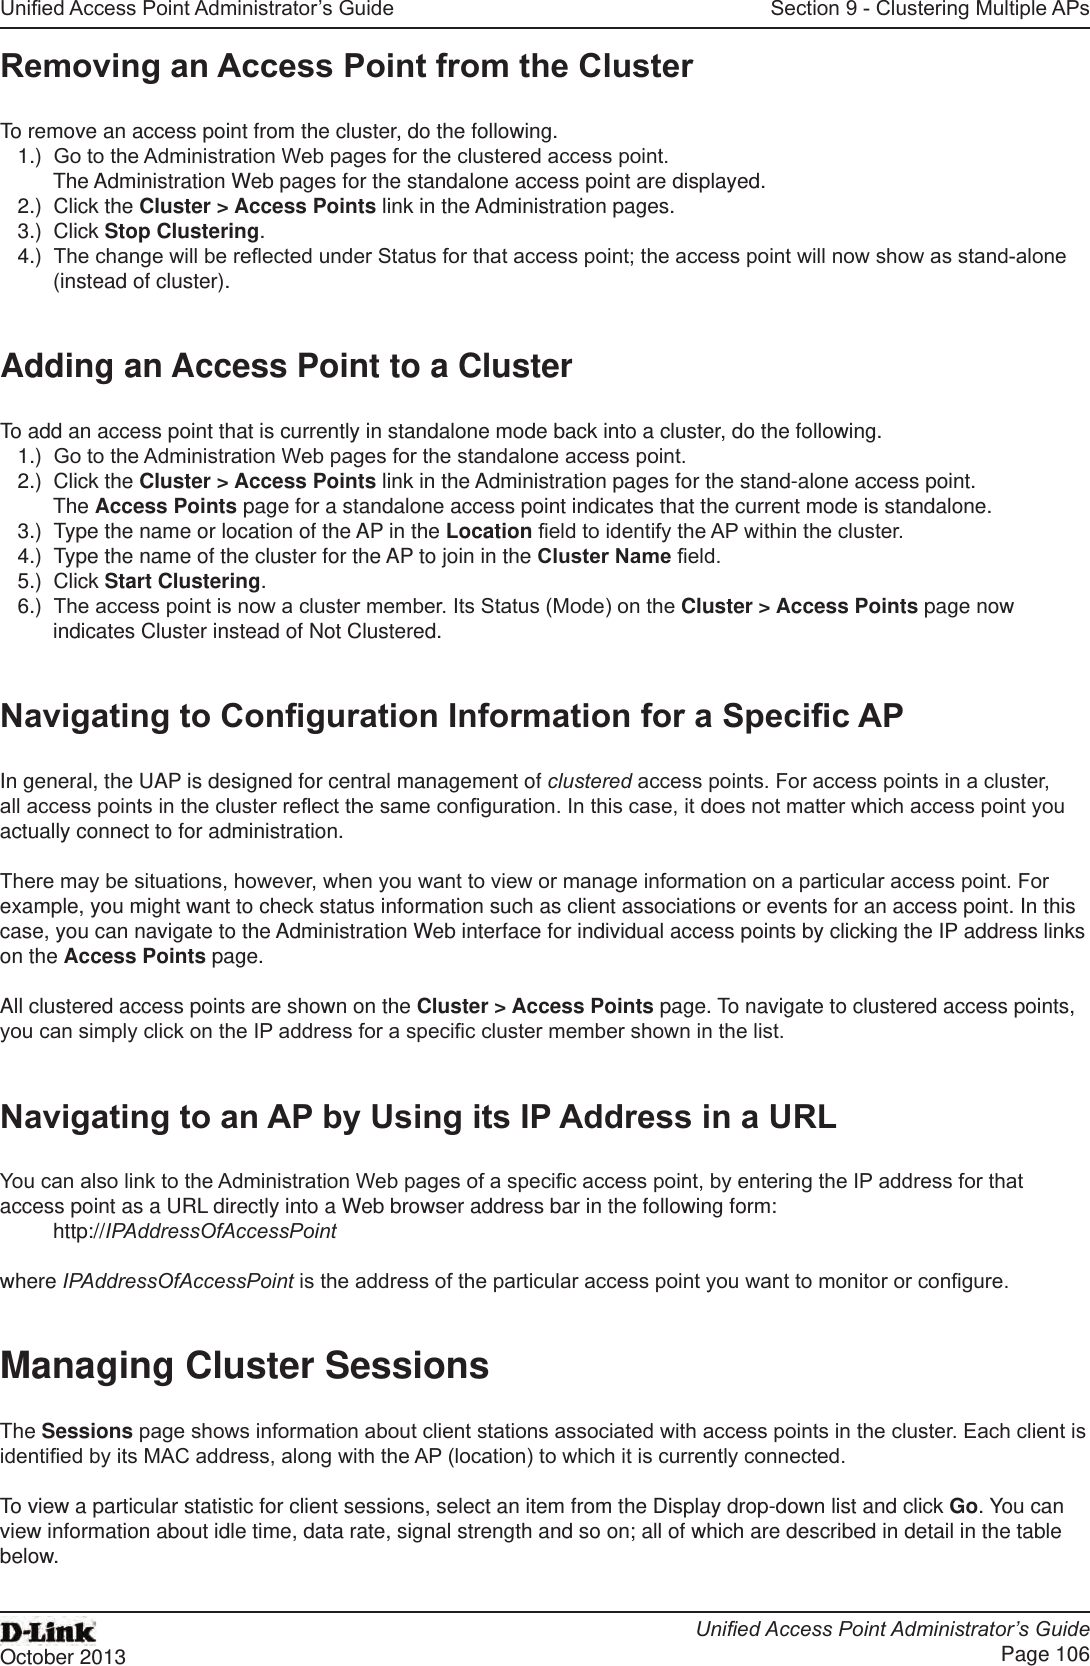 Unied Access Point Administrator’s GuideUnied Access Point Administrator’s GuidePage 106October 2013Section 9 - Clustering Multiple APsRemoving an Access Point from the ClusterTo remove an access point from the cluster, do the following.1.)  Go to the Administration Web pages for the clustered access point. The Administration Web pages for the standalone access point are displayed.2.)  Click the Cluster &gt; Access Points link in the Administration pages.3.)  Click Stop Clustering.4.)  The change will be reected under Status for that access point; the access point will now show as stand-alone (instead of cluster).Adding an Access Point to a ClusterTo add an access point that is currently in standalone mode back into a cluster, do the following.1.)  Go to the Administration Web pages for the standalone access point.2.)  Click the Cluster &gt; Access Points link in the Administration pages for the stand-alone access point.The Access Points page for a standalone access point indicates that the current mode is standalone.3.)  Type the name or location of the AP in the Location eld to identify the AP within the cluster.4.)  Type the name of the cluster for the AP to join in the Cluster Name eld.5.)  Click Start Clustering.6.)  The access point is now a cluster member. Its Status (Mode) on the Cluster &gt; Access Points page now indicates Cluster instead of Not Clustered.Navigating to Conguration Information for a Specic APIn general, the UAP is designed for central management of clustered access points. For access points in a cluster, all access points in the cluster reect the same conguration. In this case, it does not matter which access point you actually connect to for administration.There may be situations, however, when you want to view or manage information on a particular access point. For example, you might want to check status information such as client associations or events for an access point. In this case, you can navigate to the Administration Web interface for individual access points by clicking the IP address links on the Access Points page.All clustered access points are shown on the Cluster &gt; Access Points page. To navigate to clustered access points, you can simply click on the IP address for a specic cluster member shown in the list.Navigating to an AP by Using its IP Address in a URLYou can also link to the Administration Web pages of a specic access point, by entering the IP address for that access point as a URL directly into a Web browser address bar in the following form:http://IPAddressOfAccessPointwhere IPAddressOfAccessPoint is the address of the particular access point you want to monitor or congure.Managing Cluster SessionsThe Sessions page shows information about client stations associated with access points in the cluster. Each client is identied by its MAC address, along with the AP (location) to which it is currently connected.To view a particular statistic for client sessions, select an item from the Display drop-down list and click Go. You can view information about idle time, data rate, signal strength and so on; all of which are described in detail in the table below.